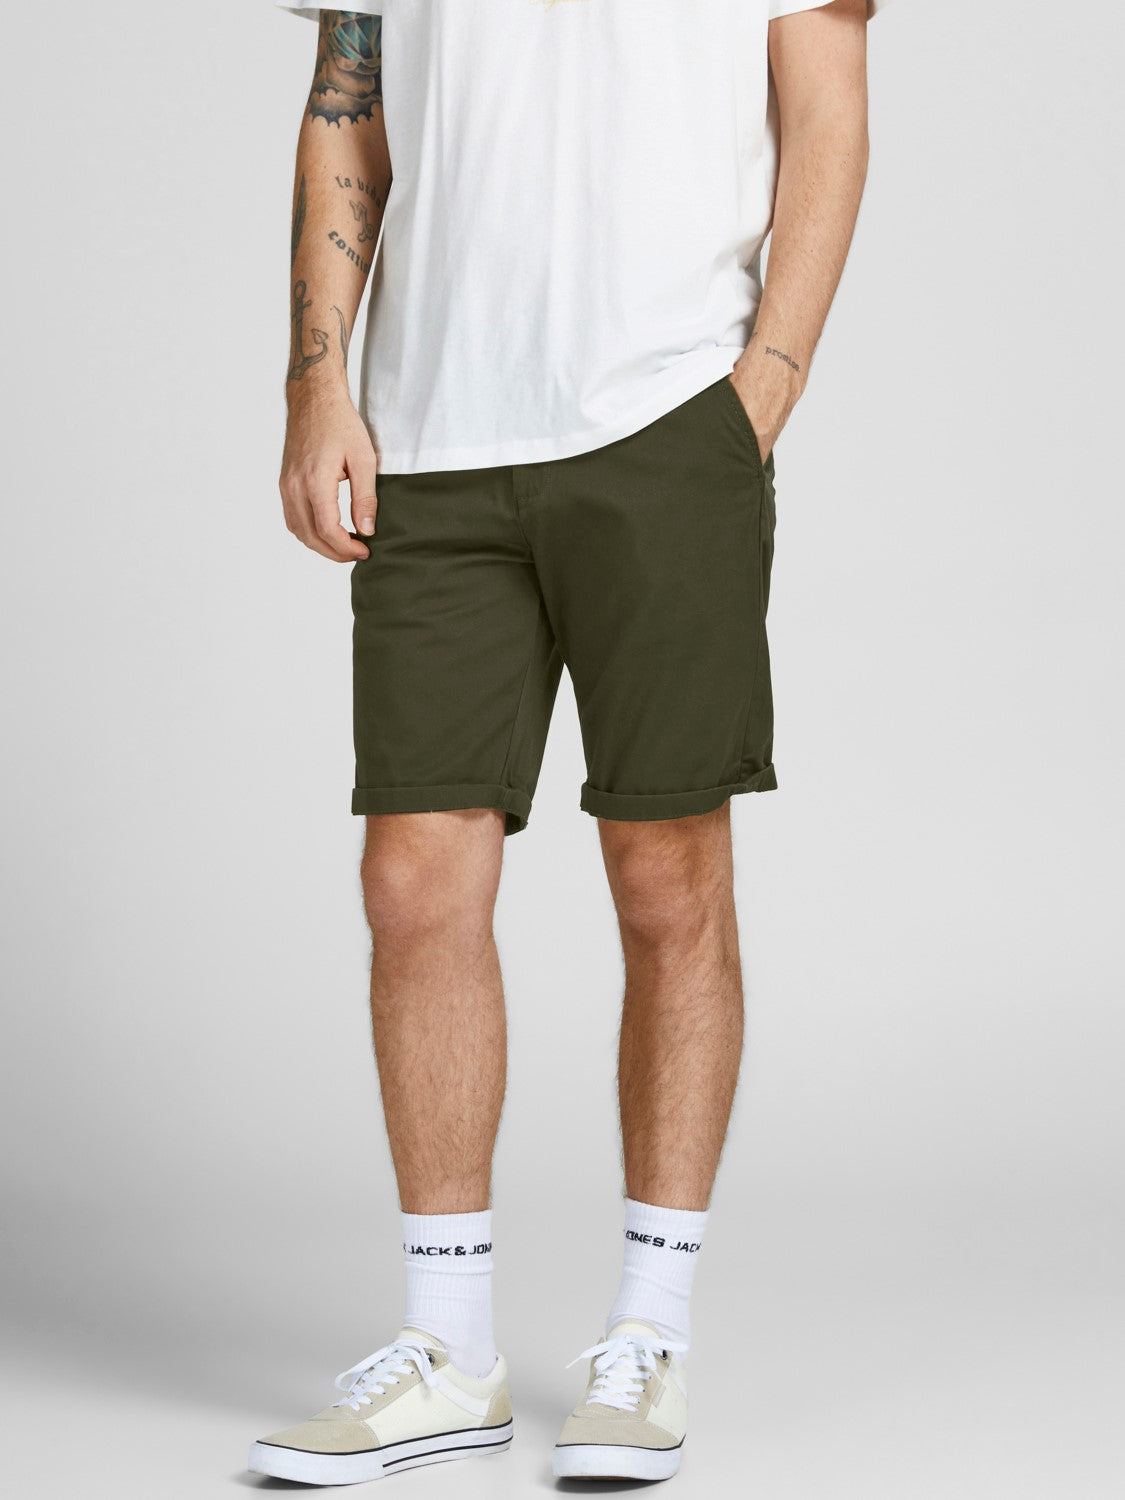 Jack & Jones Mens Bowie Chino Shorts, 02, 12165604, Forest Night